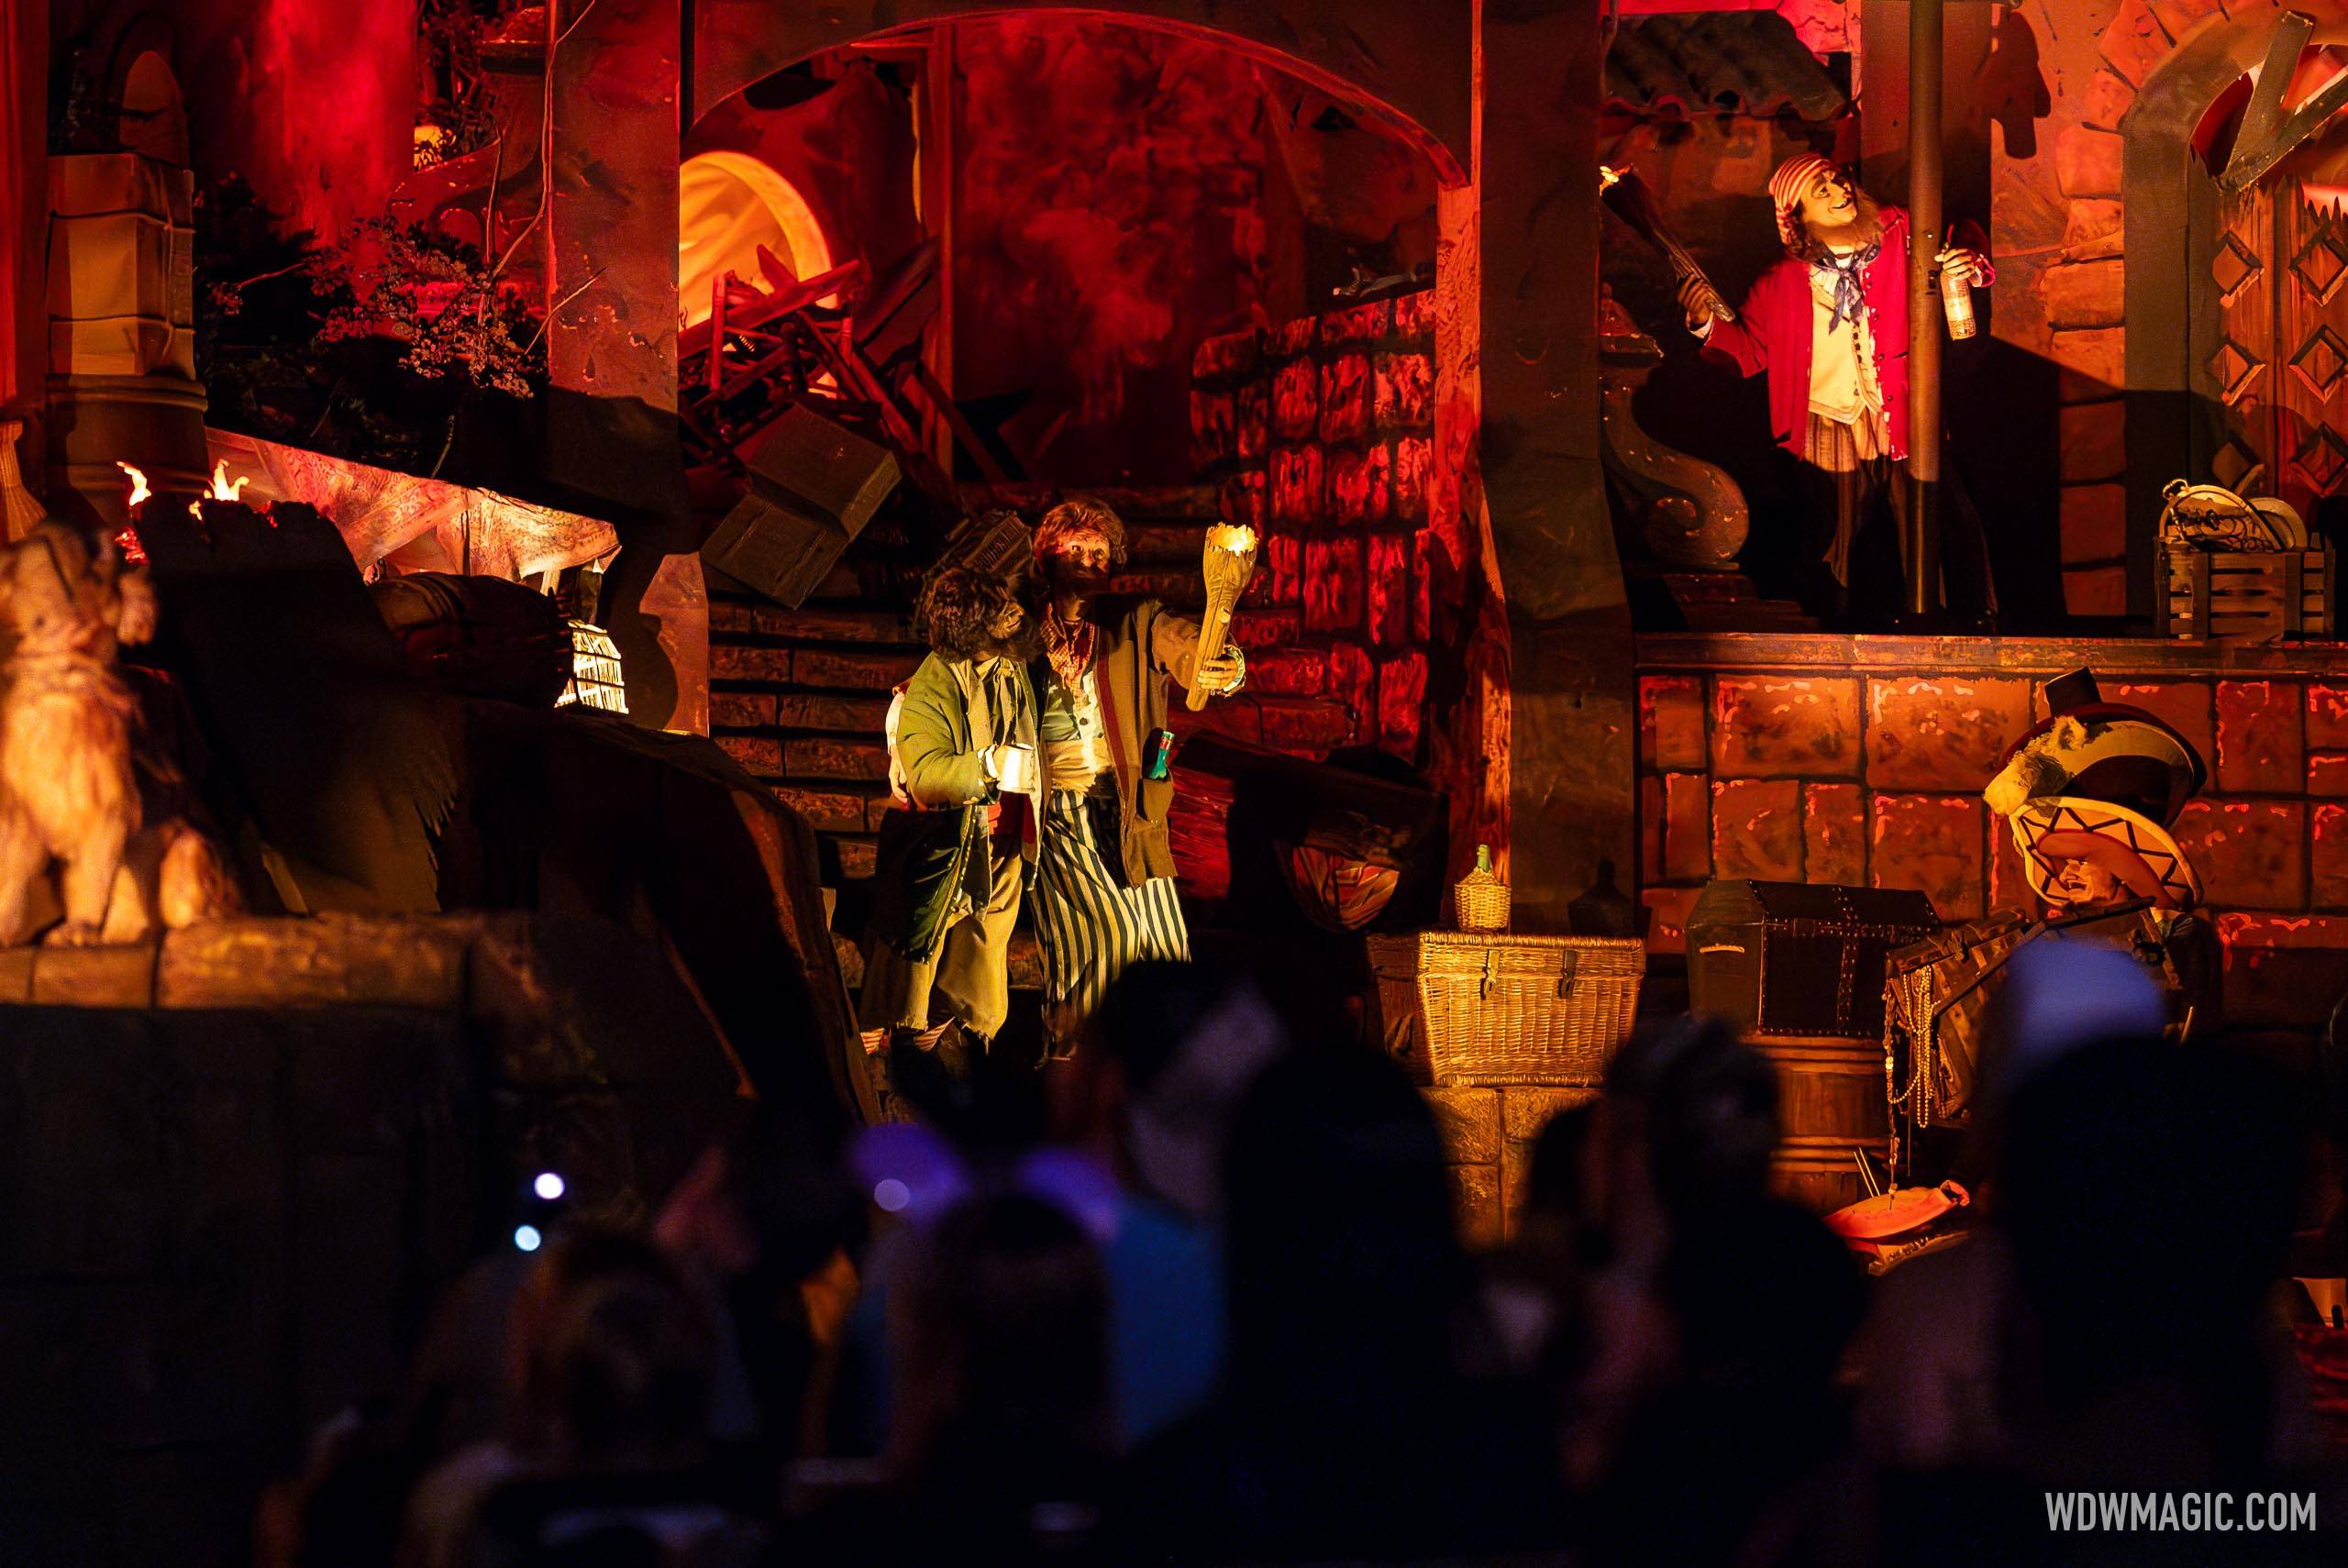 June's Pirates of the Caribbean refurbishment moved to late July